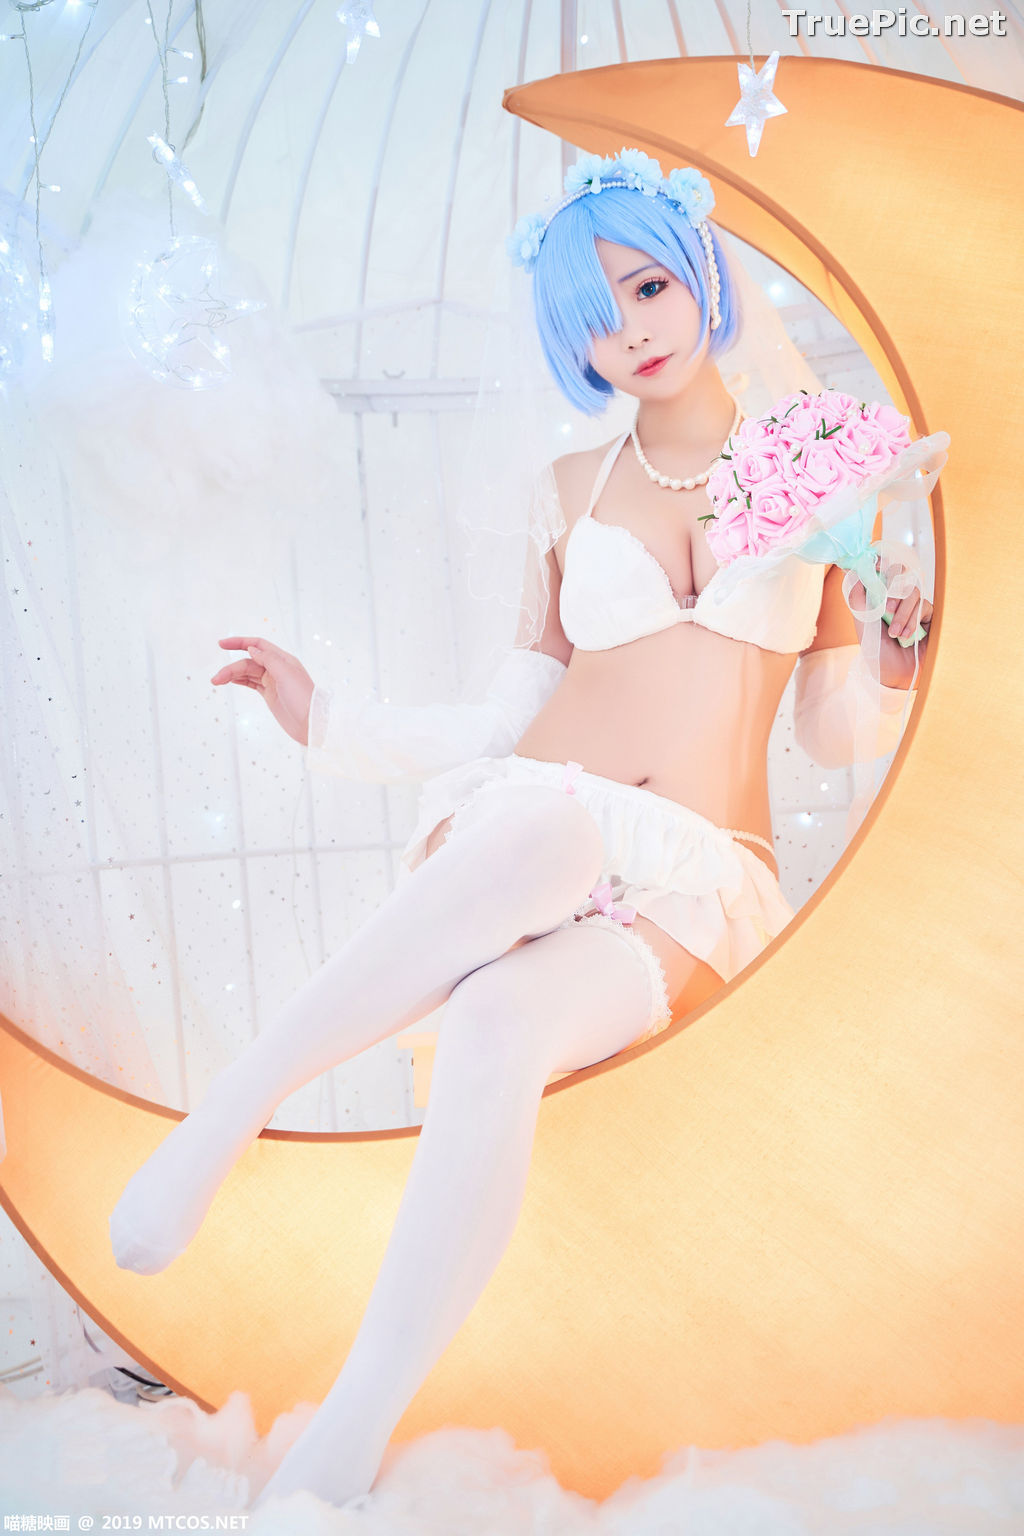 Image [MTCos] 喵糖映画 Vol.043 – Chinese Cute Model – Sexy Rem Cosplay - TruePic.net - Picture-18